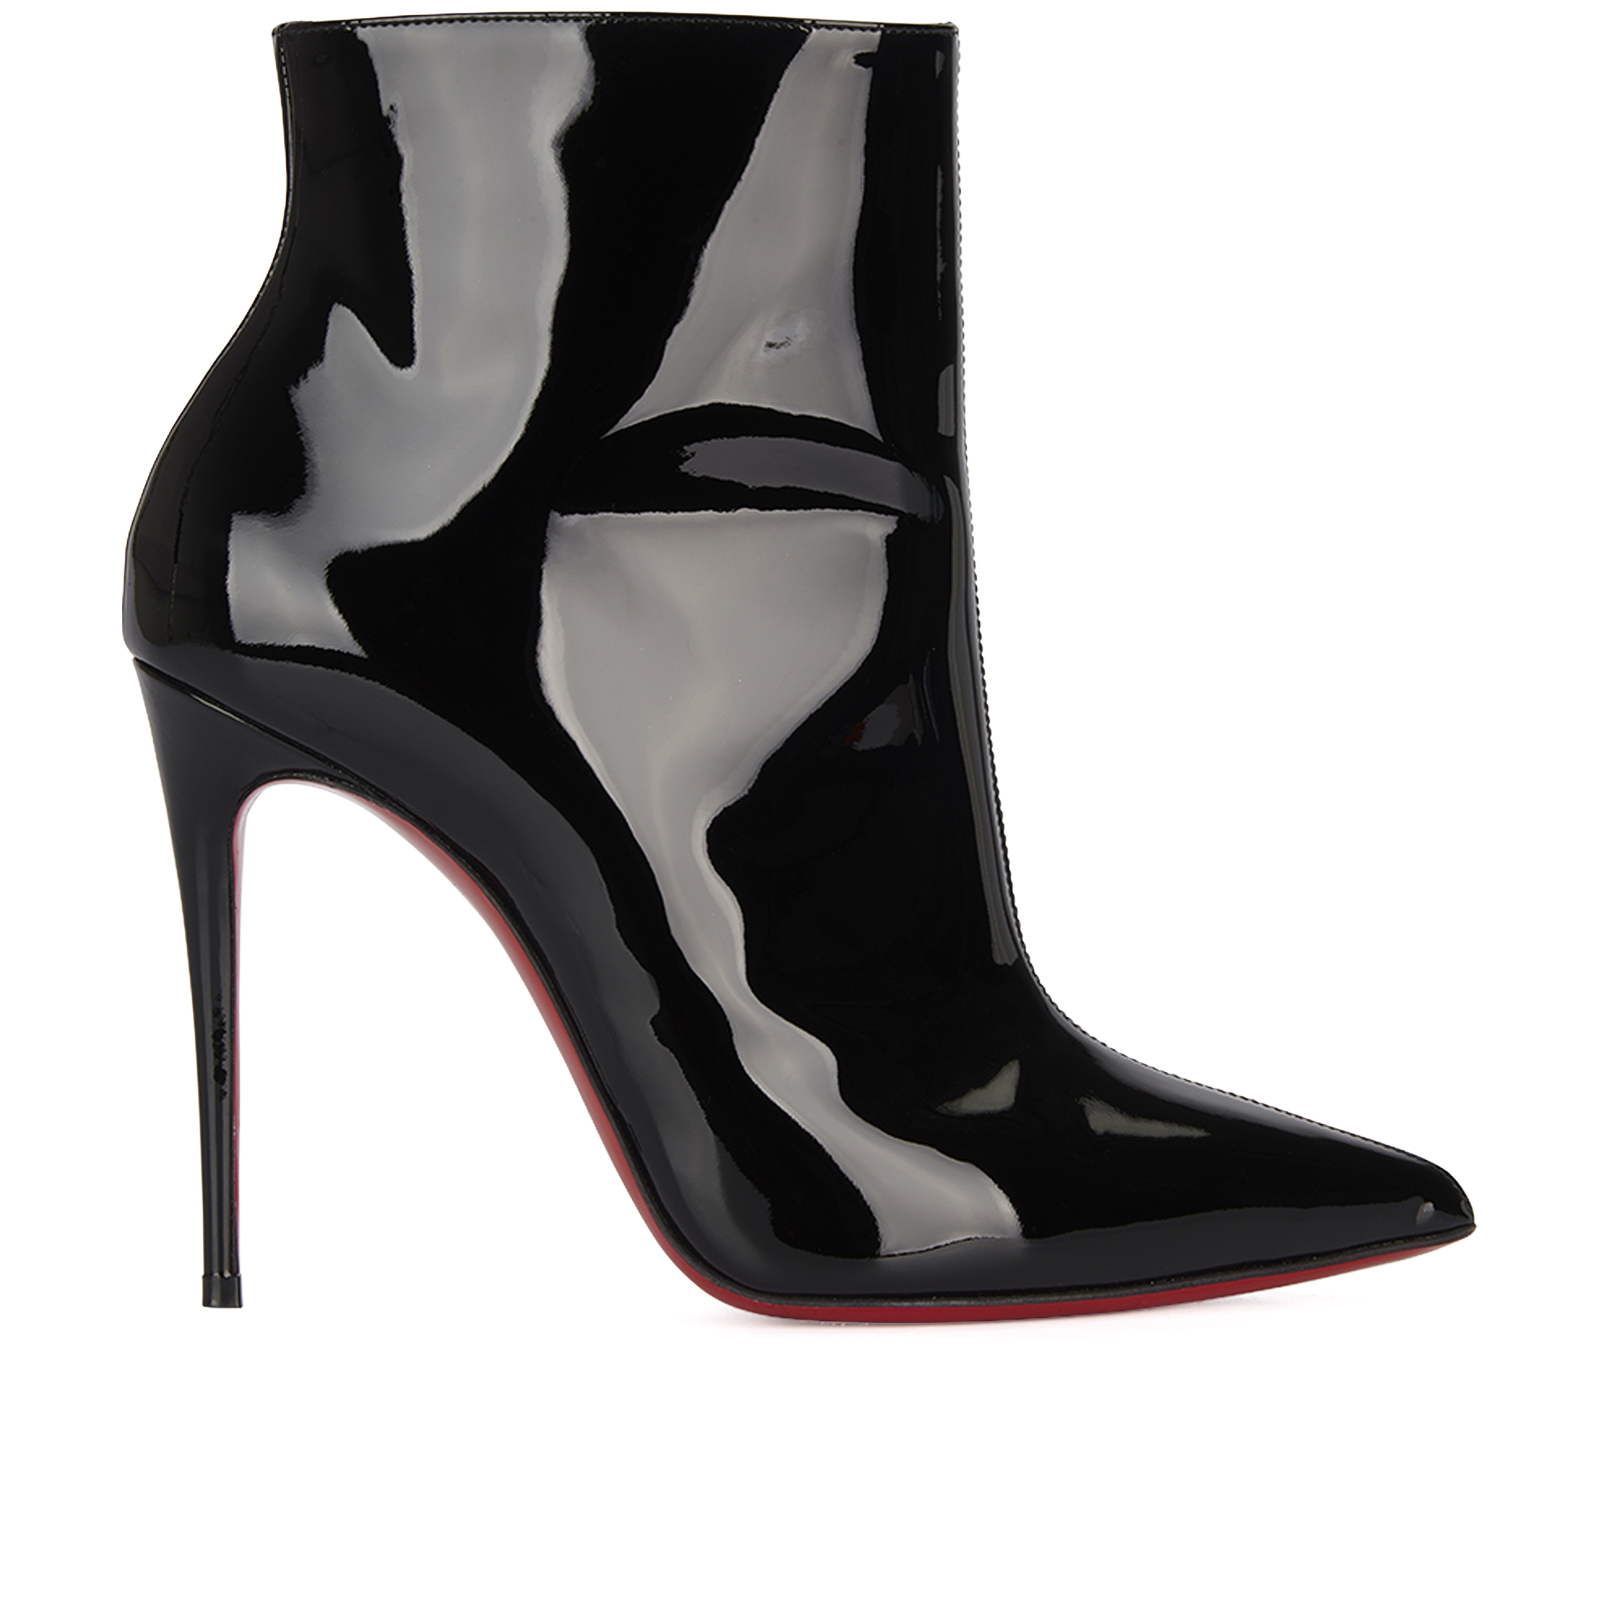 Christian Louboutin Heeled Ankle Boots, Boots - Designer Exchange